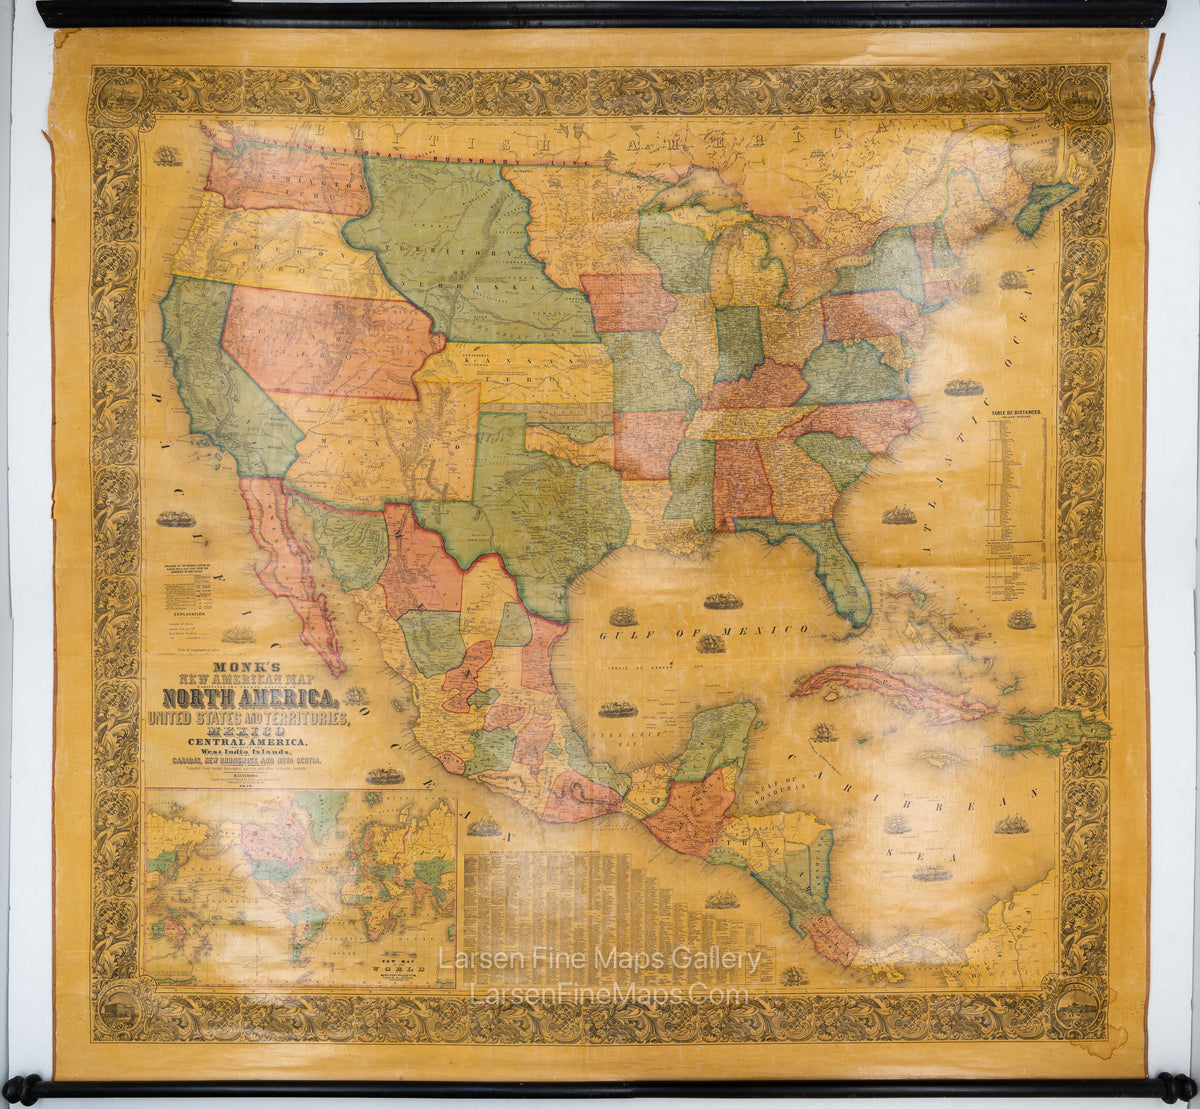 Monk's New American Map Exhibiting the larger portion of North America; Embracing the United States and Territories, Mexico and Central America, including  the West India Islands, the Canadas, New Brunswick, and Nova Scotia